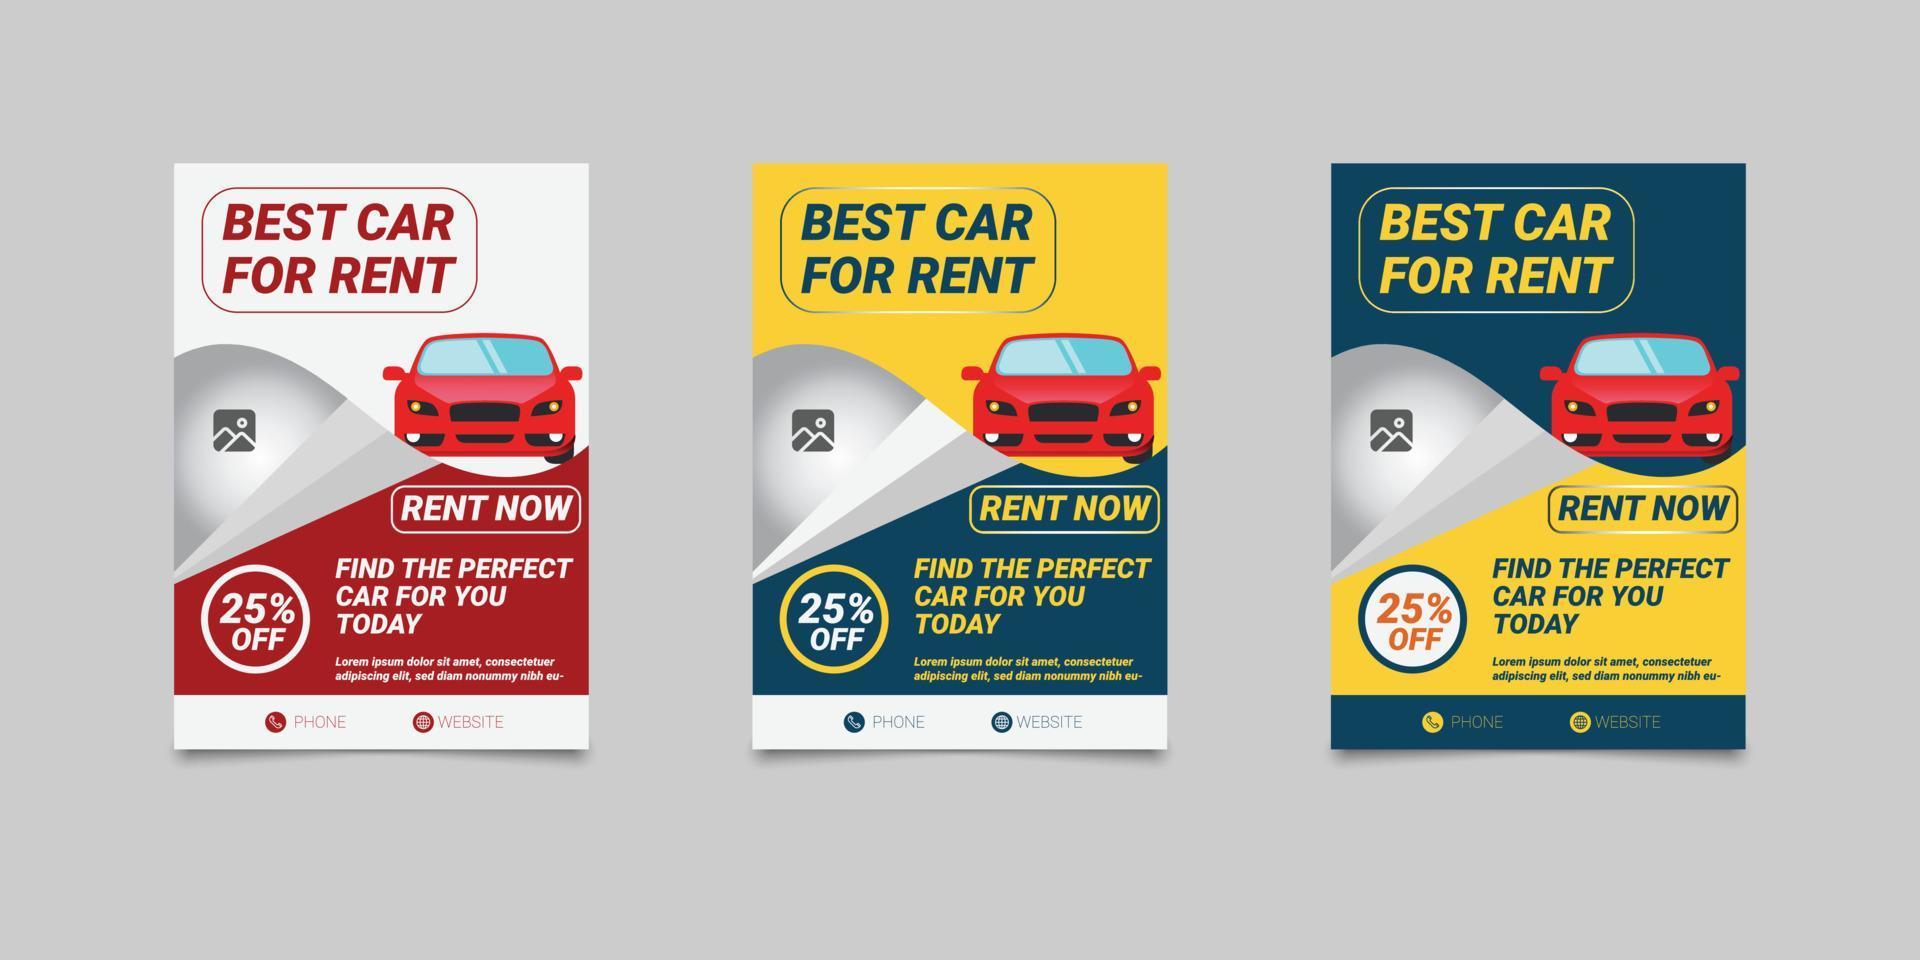 Car rental flyer design.Flat design vector illustration with a photo collage. Fully editable